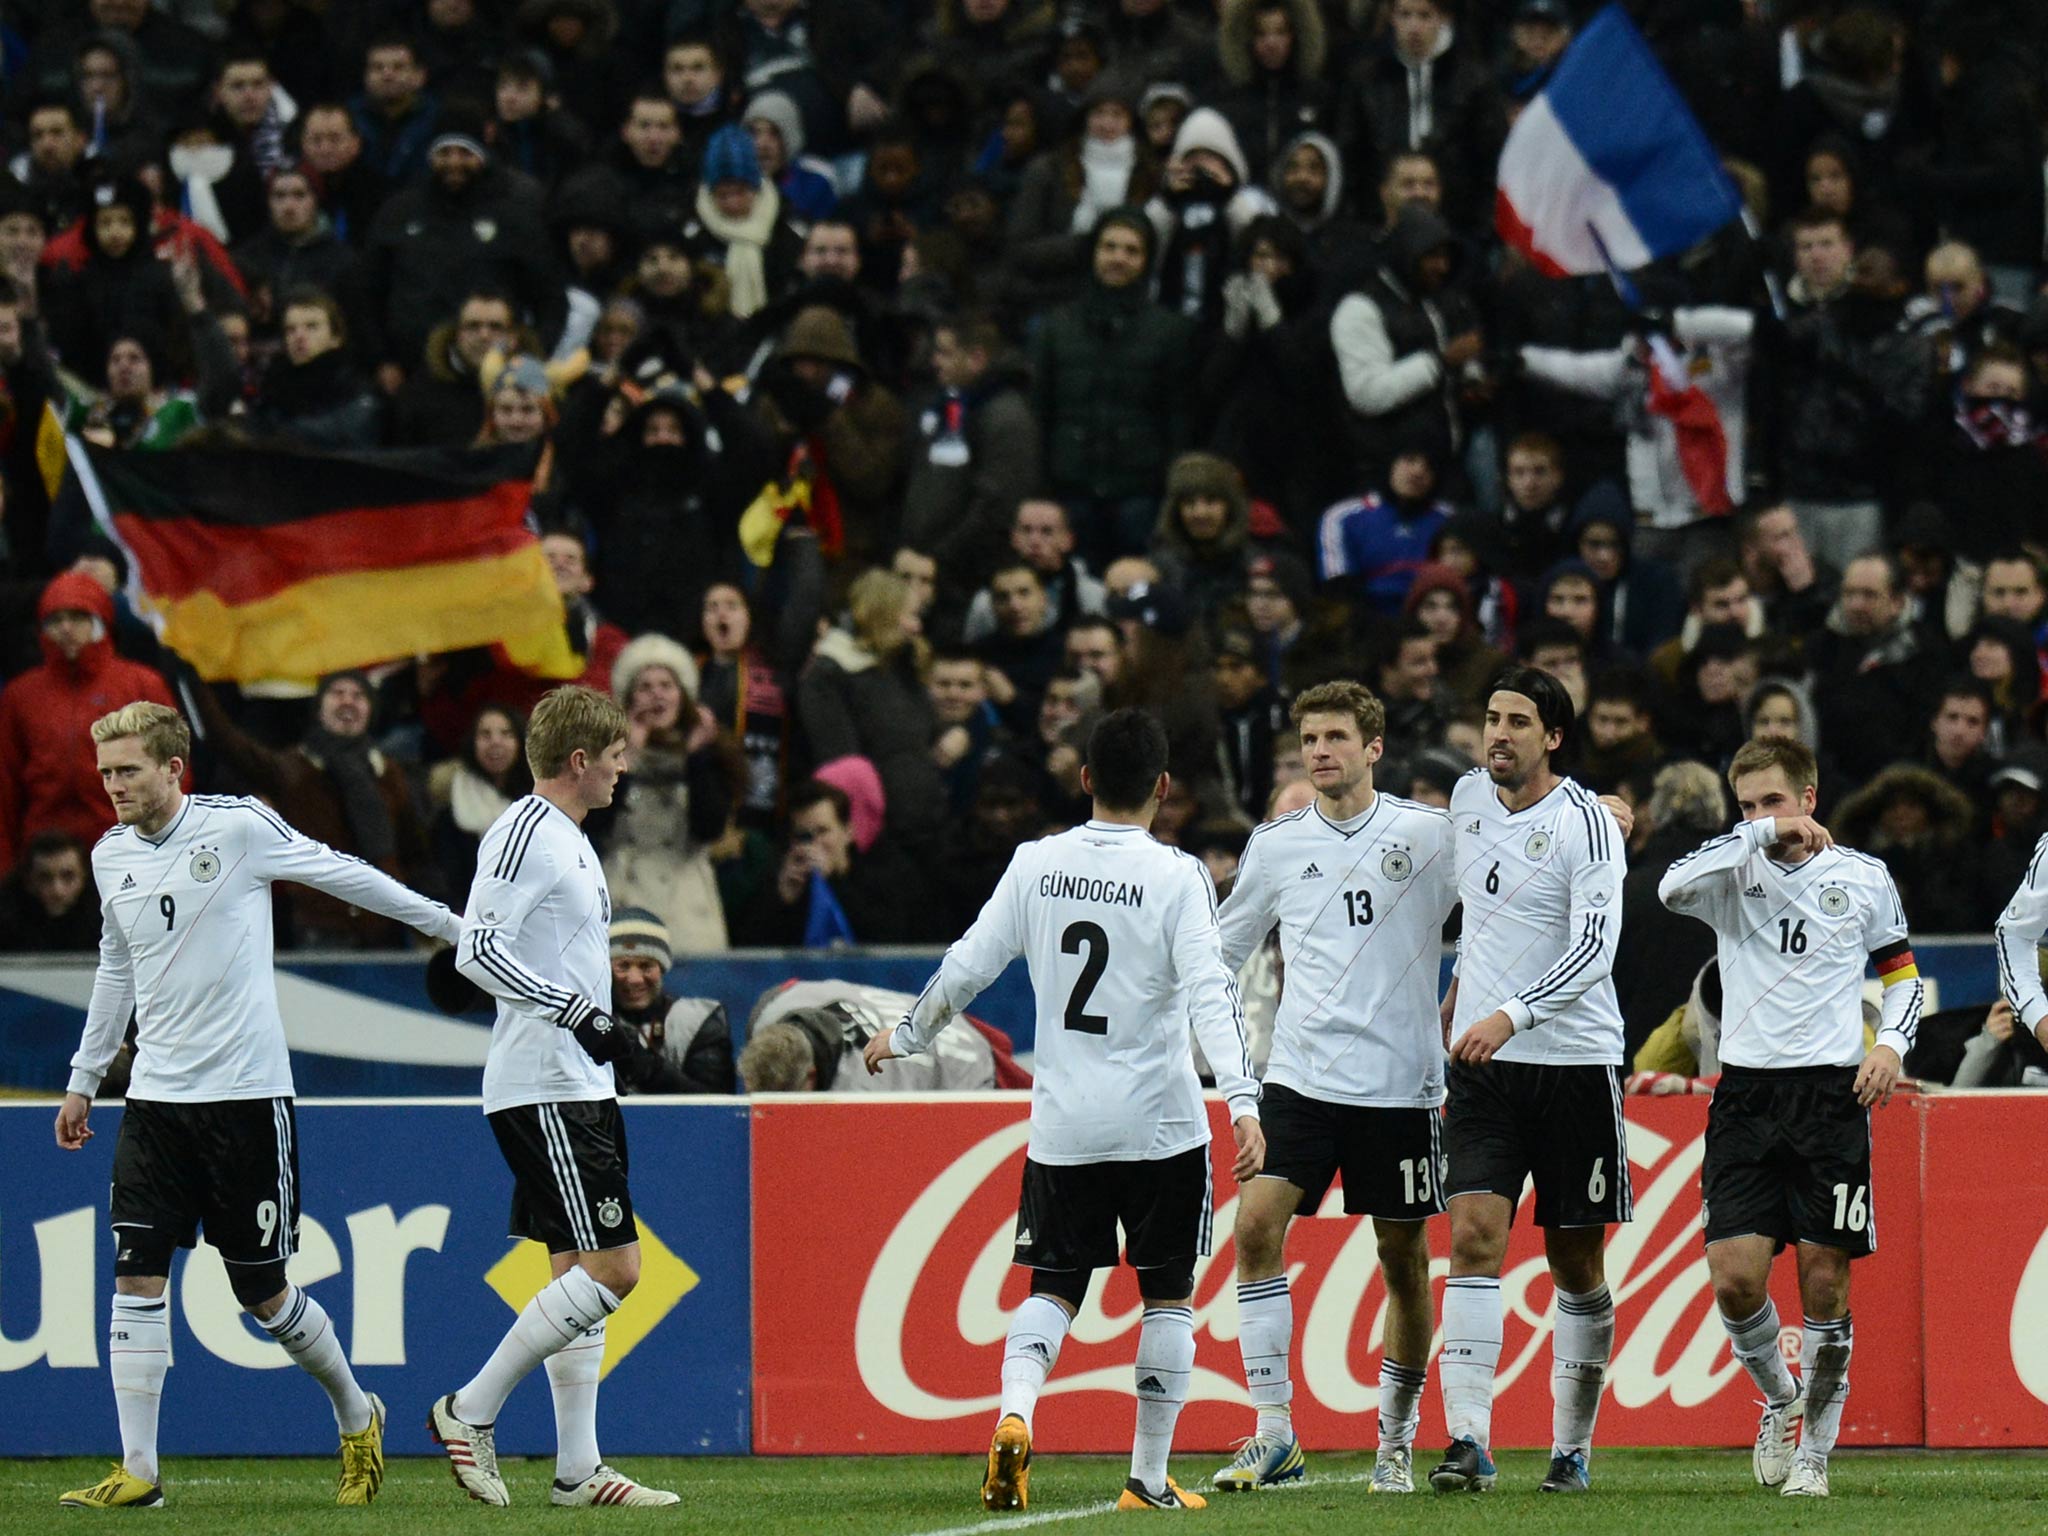 Sami Khedira is congratulated after scoring the winning goal against France